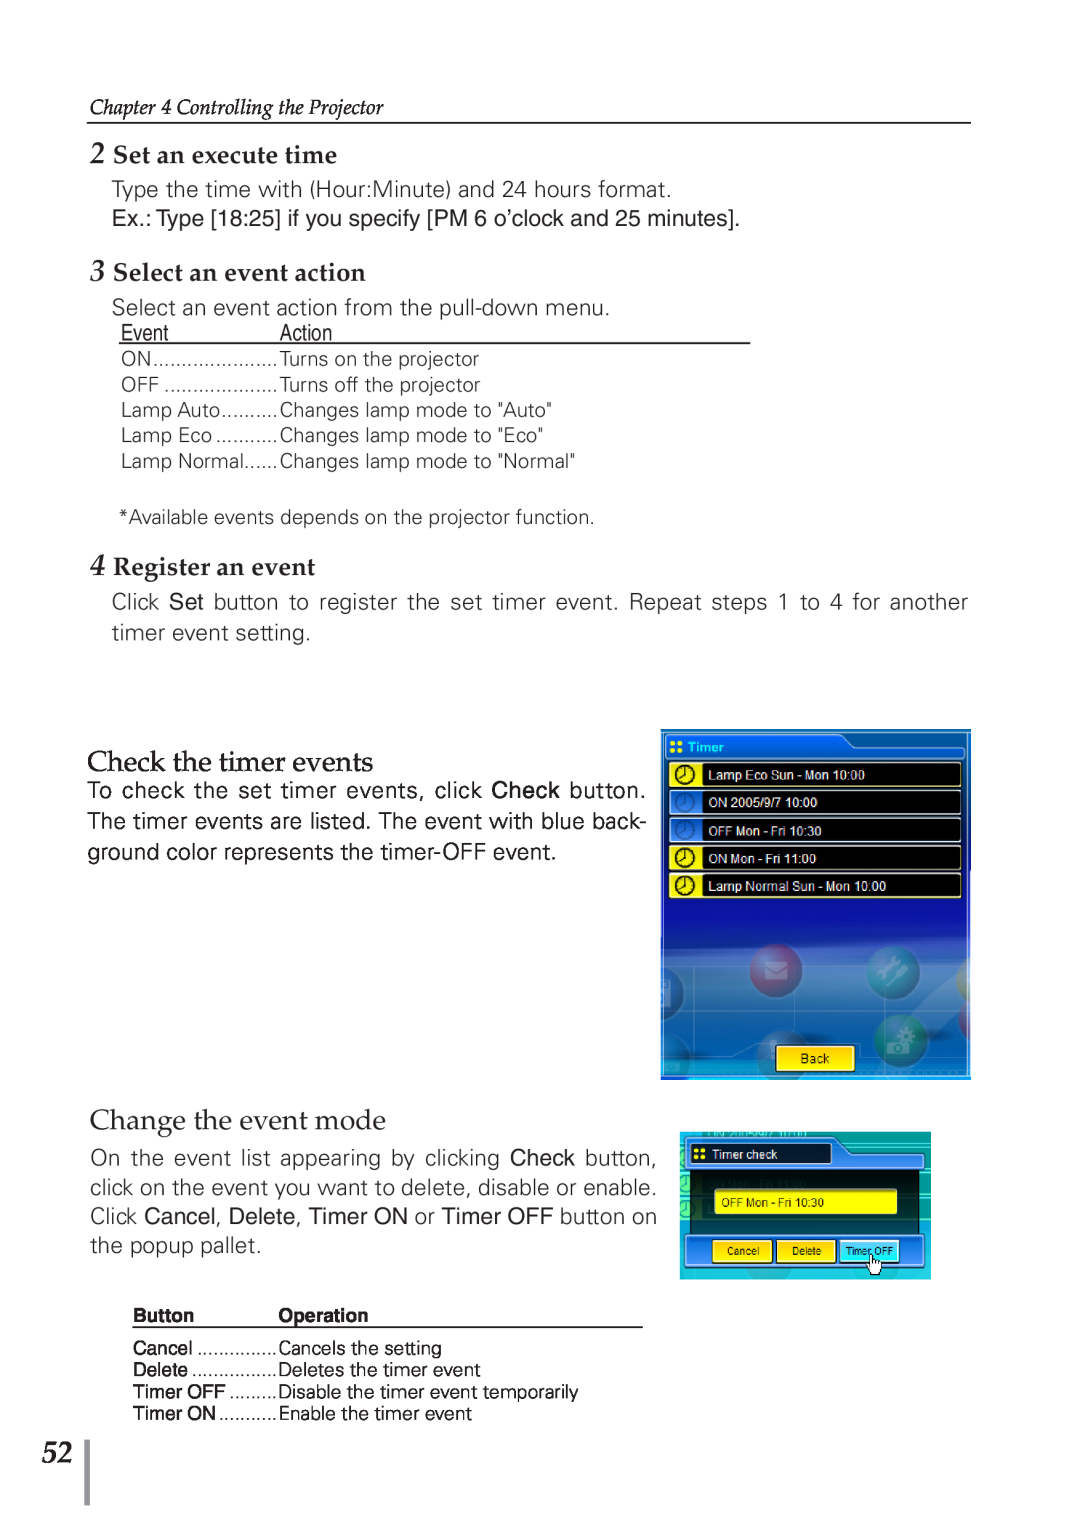 Eiki PJNET-300 owner manual Check the timer events, Change the event mode, Set an execute time, Select an event action 